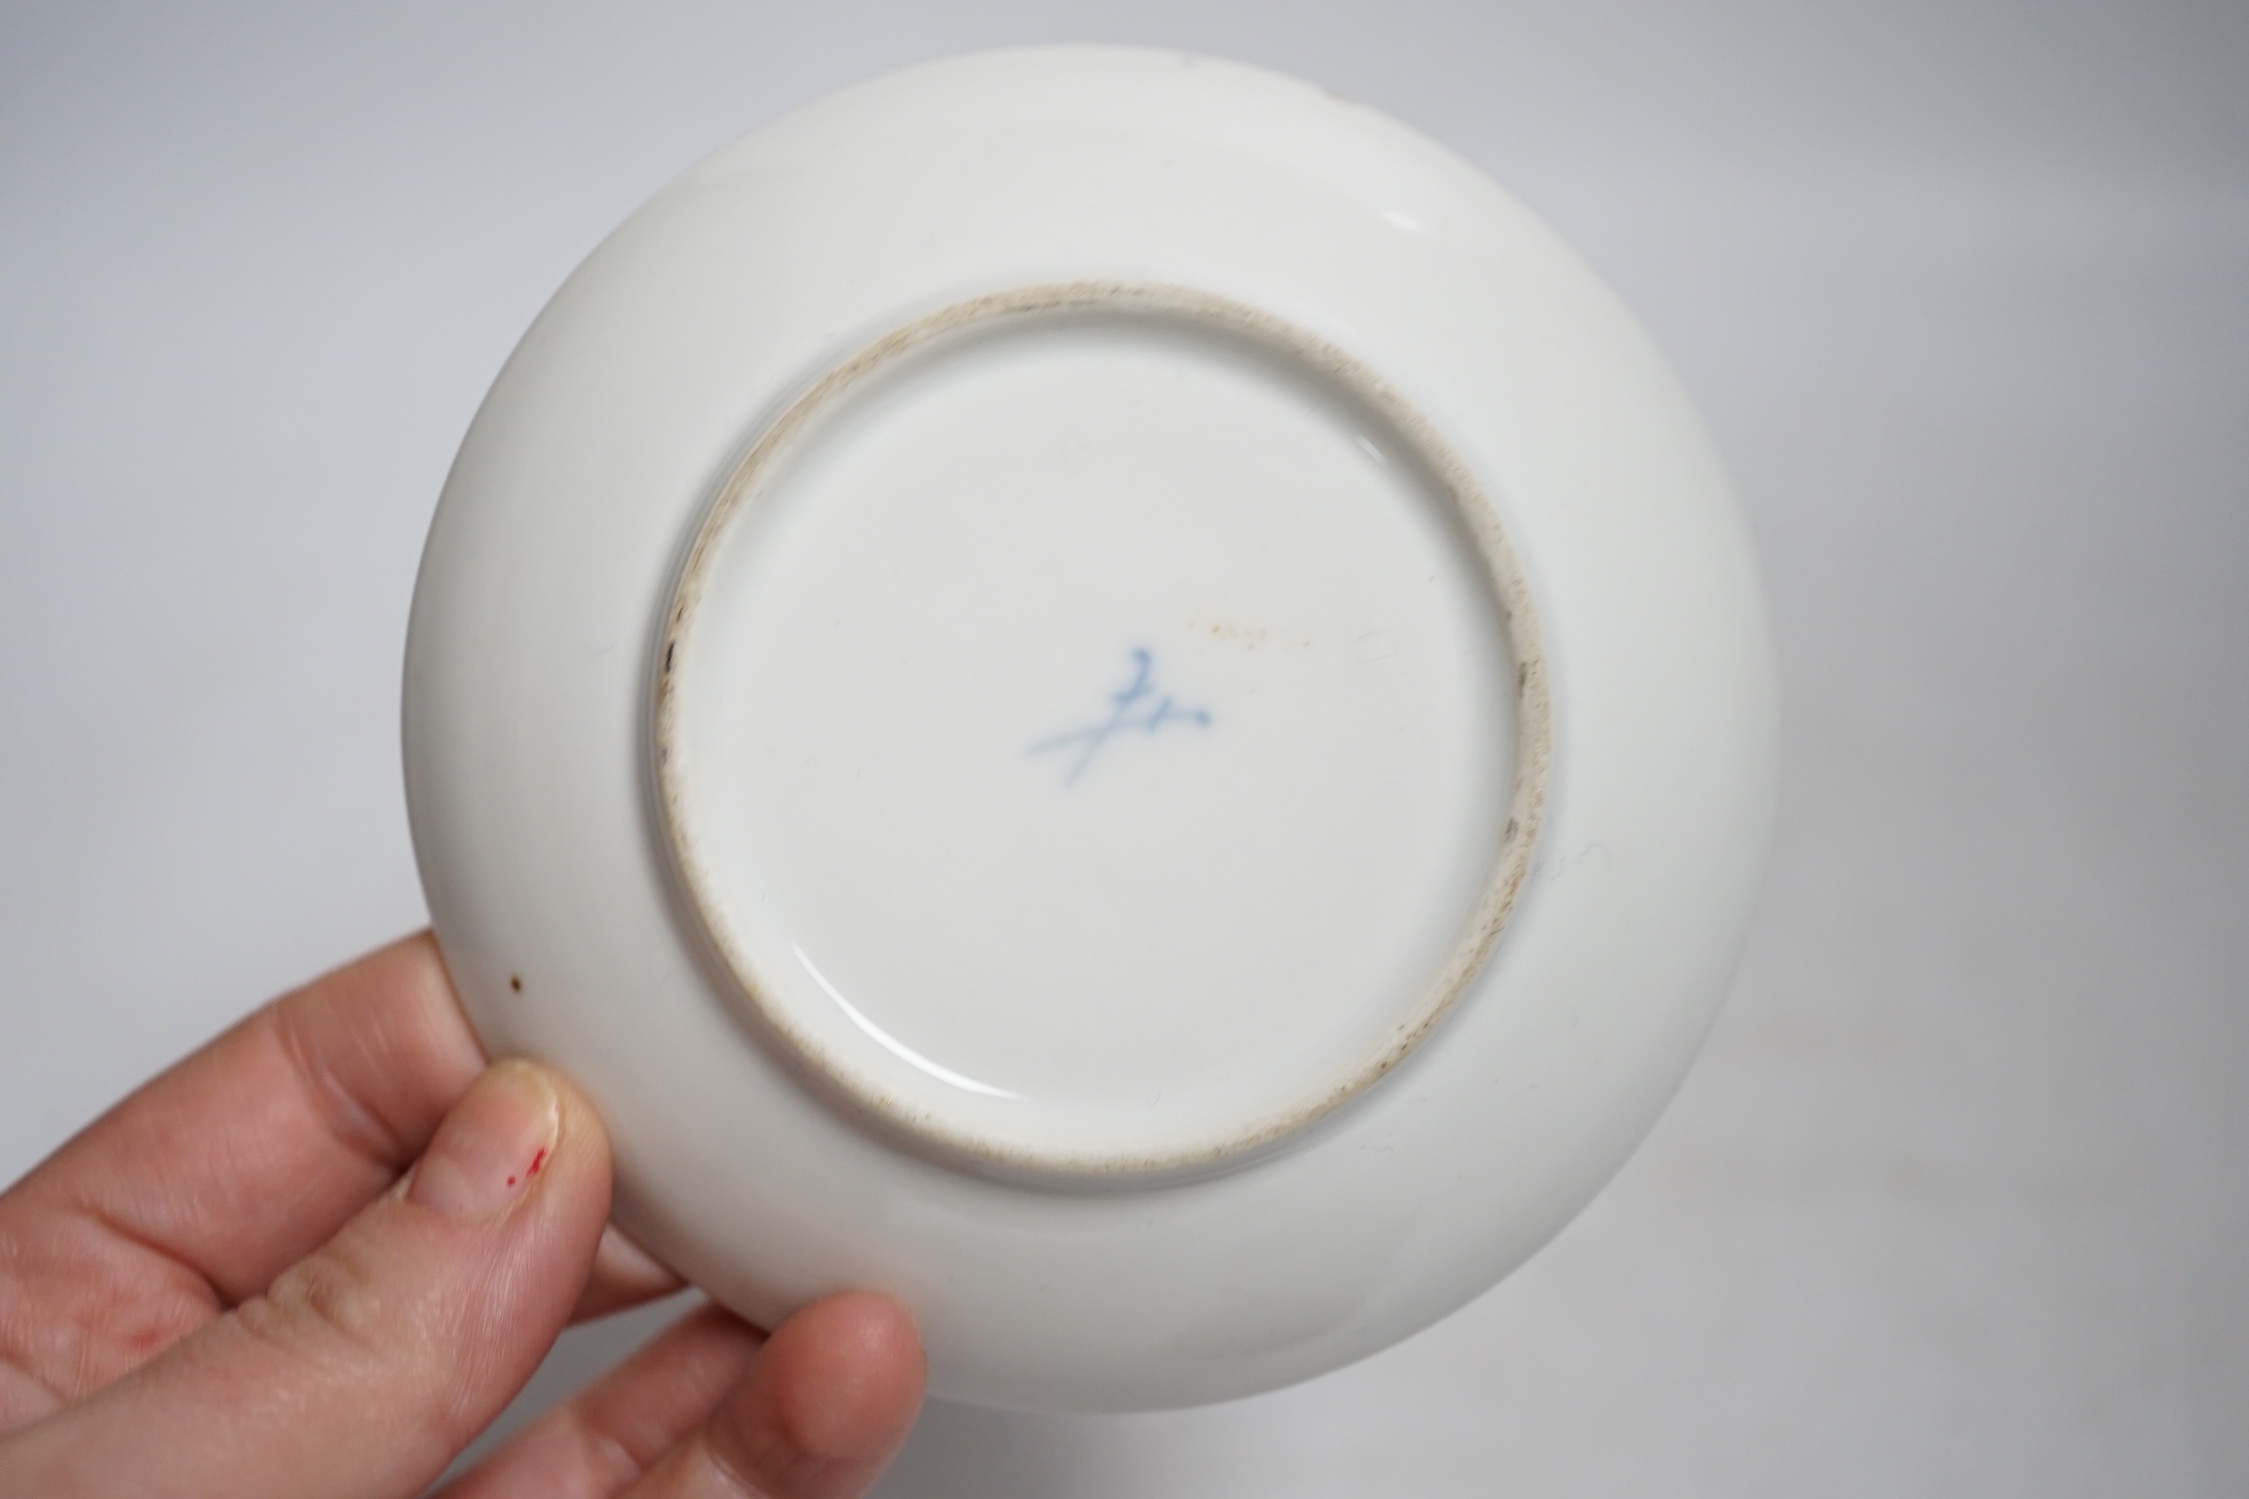 A miniature Dresden teacup and saucer in Meissen-style, cup 4.5cm